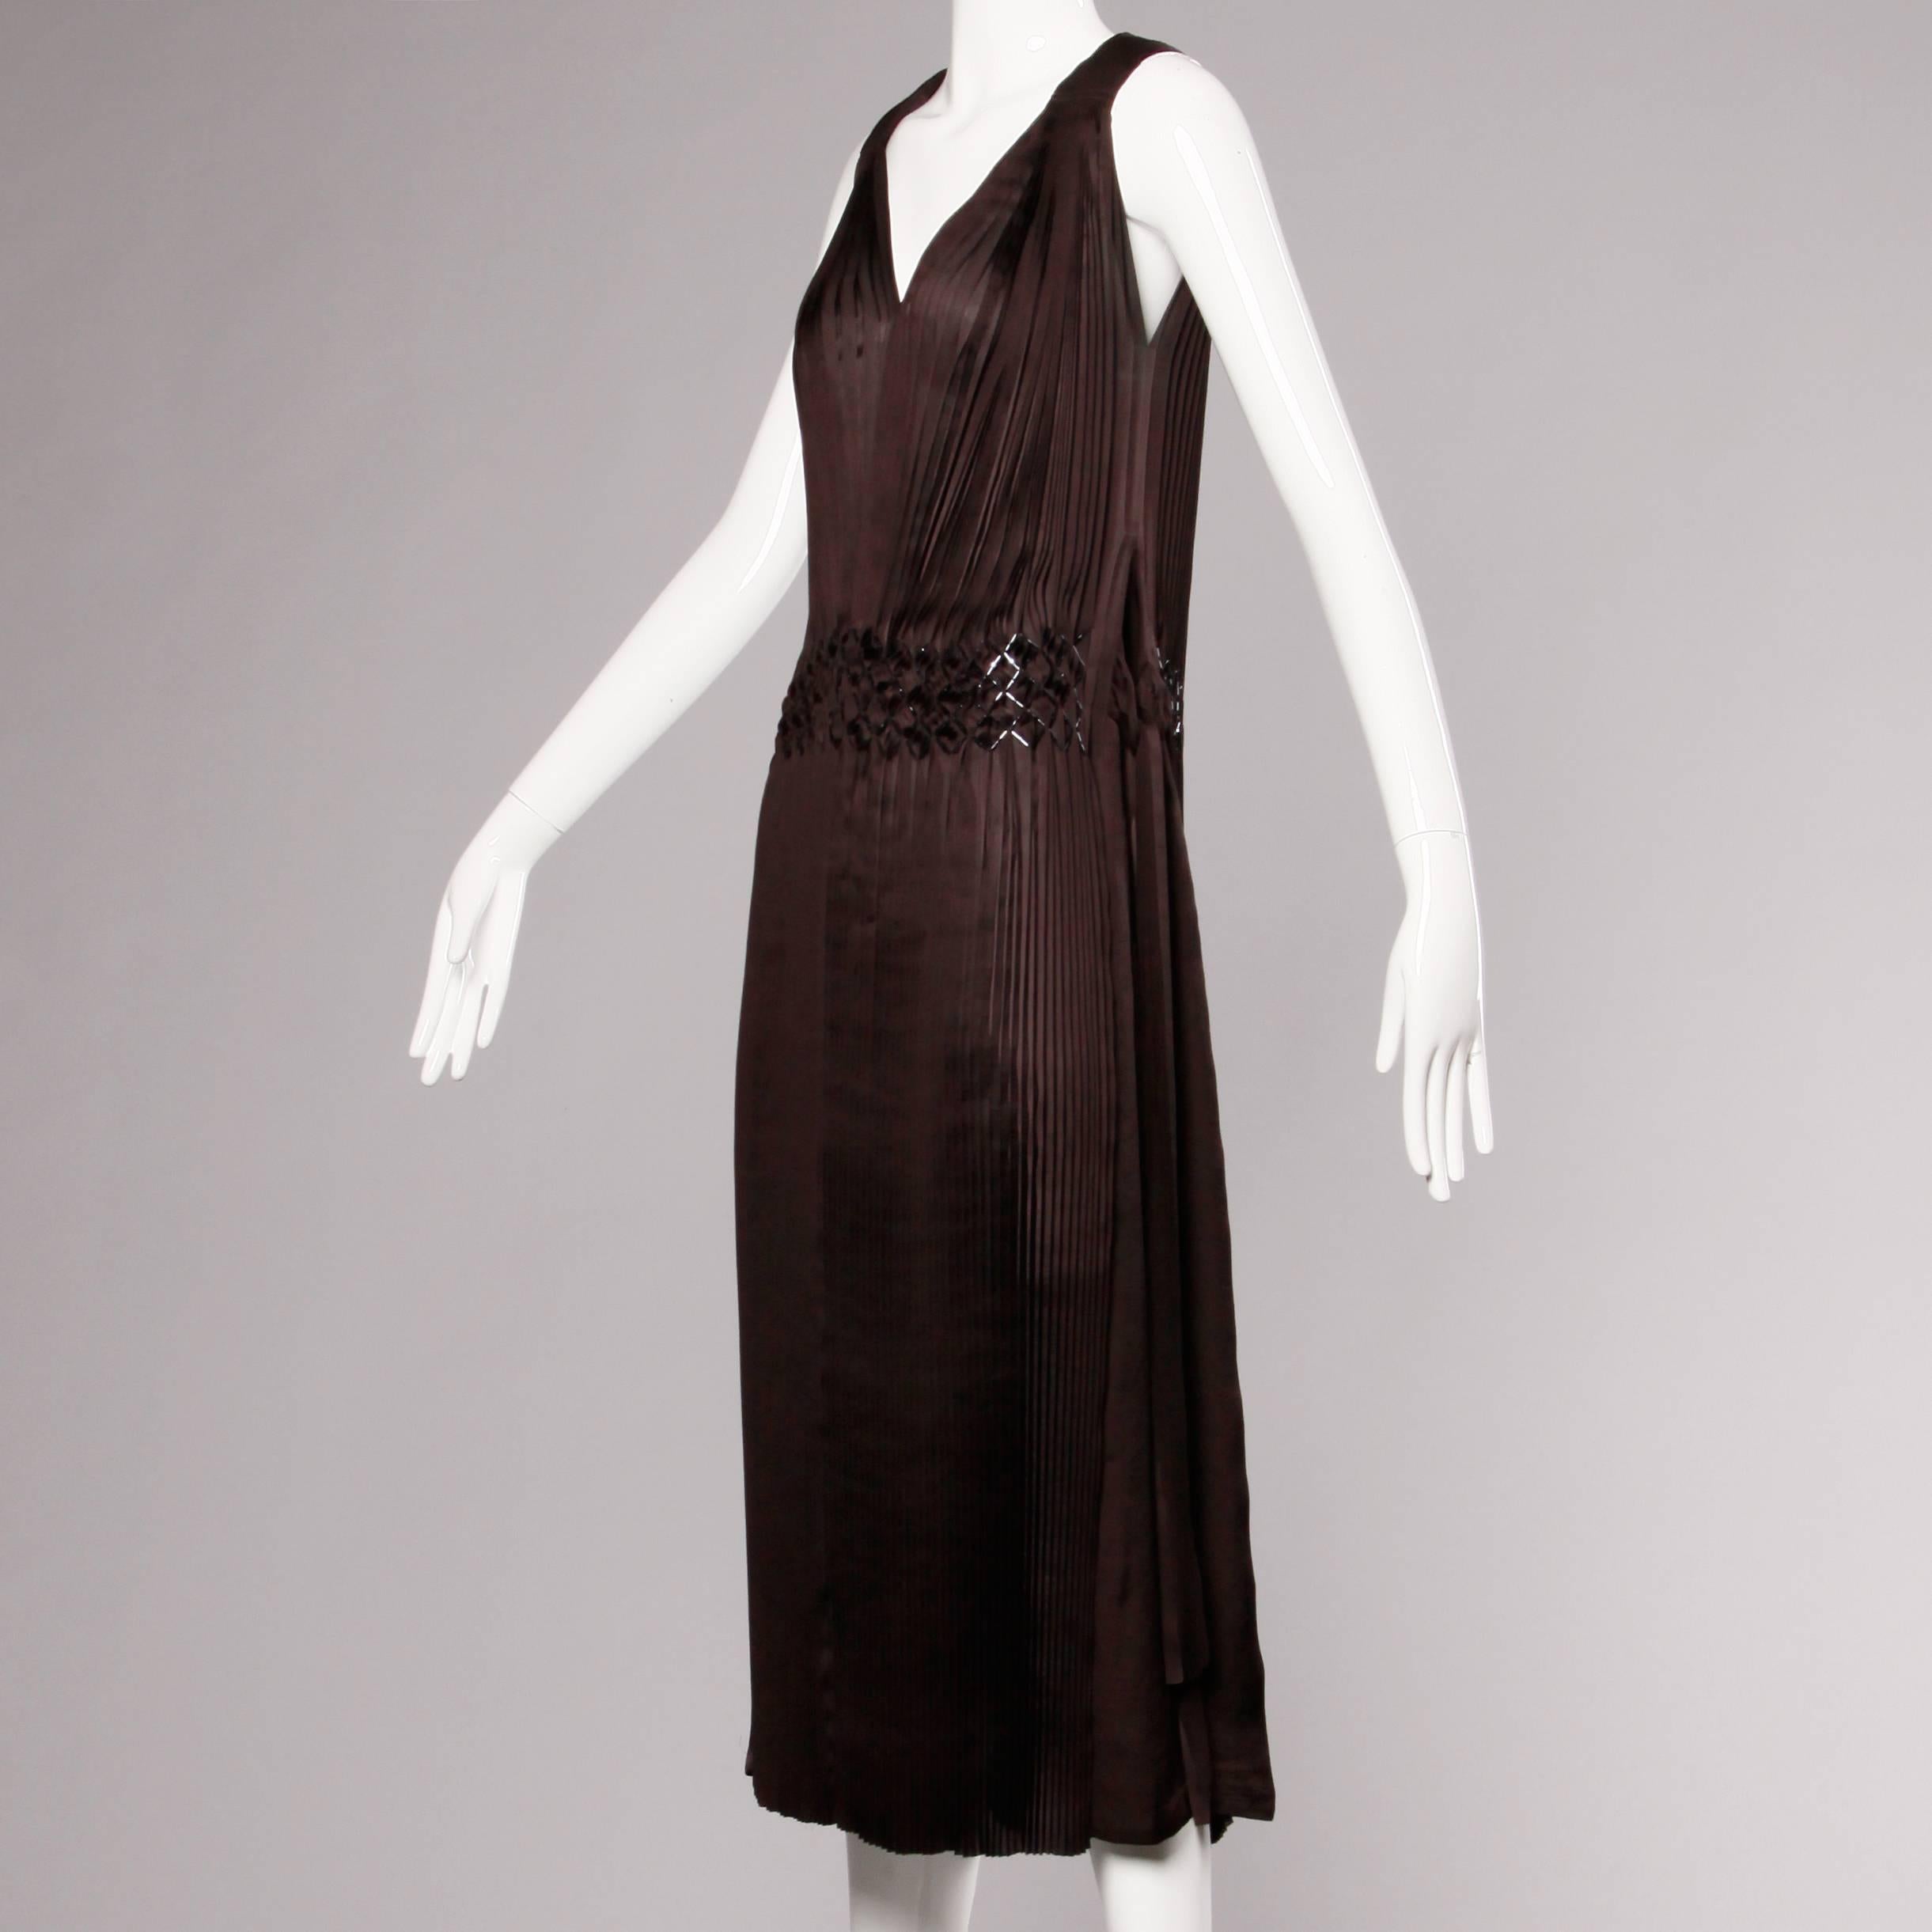 Incredible dark brown 1920s-inspired flapper dress by Issey Miyake with side ties and intricate beadwork along the low waist. Deep plunging neckline and flattering body hugging shape. Unlined. Side ties are adjustable. Marked size is a Japan 04.